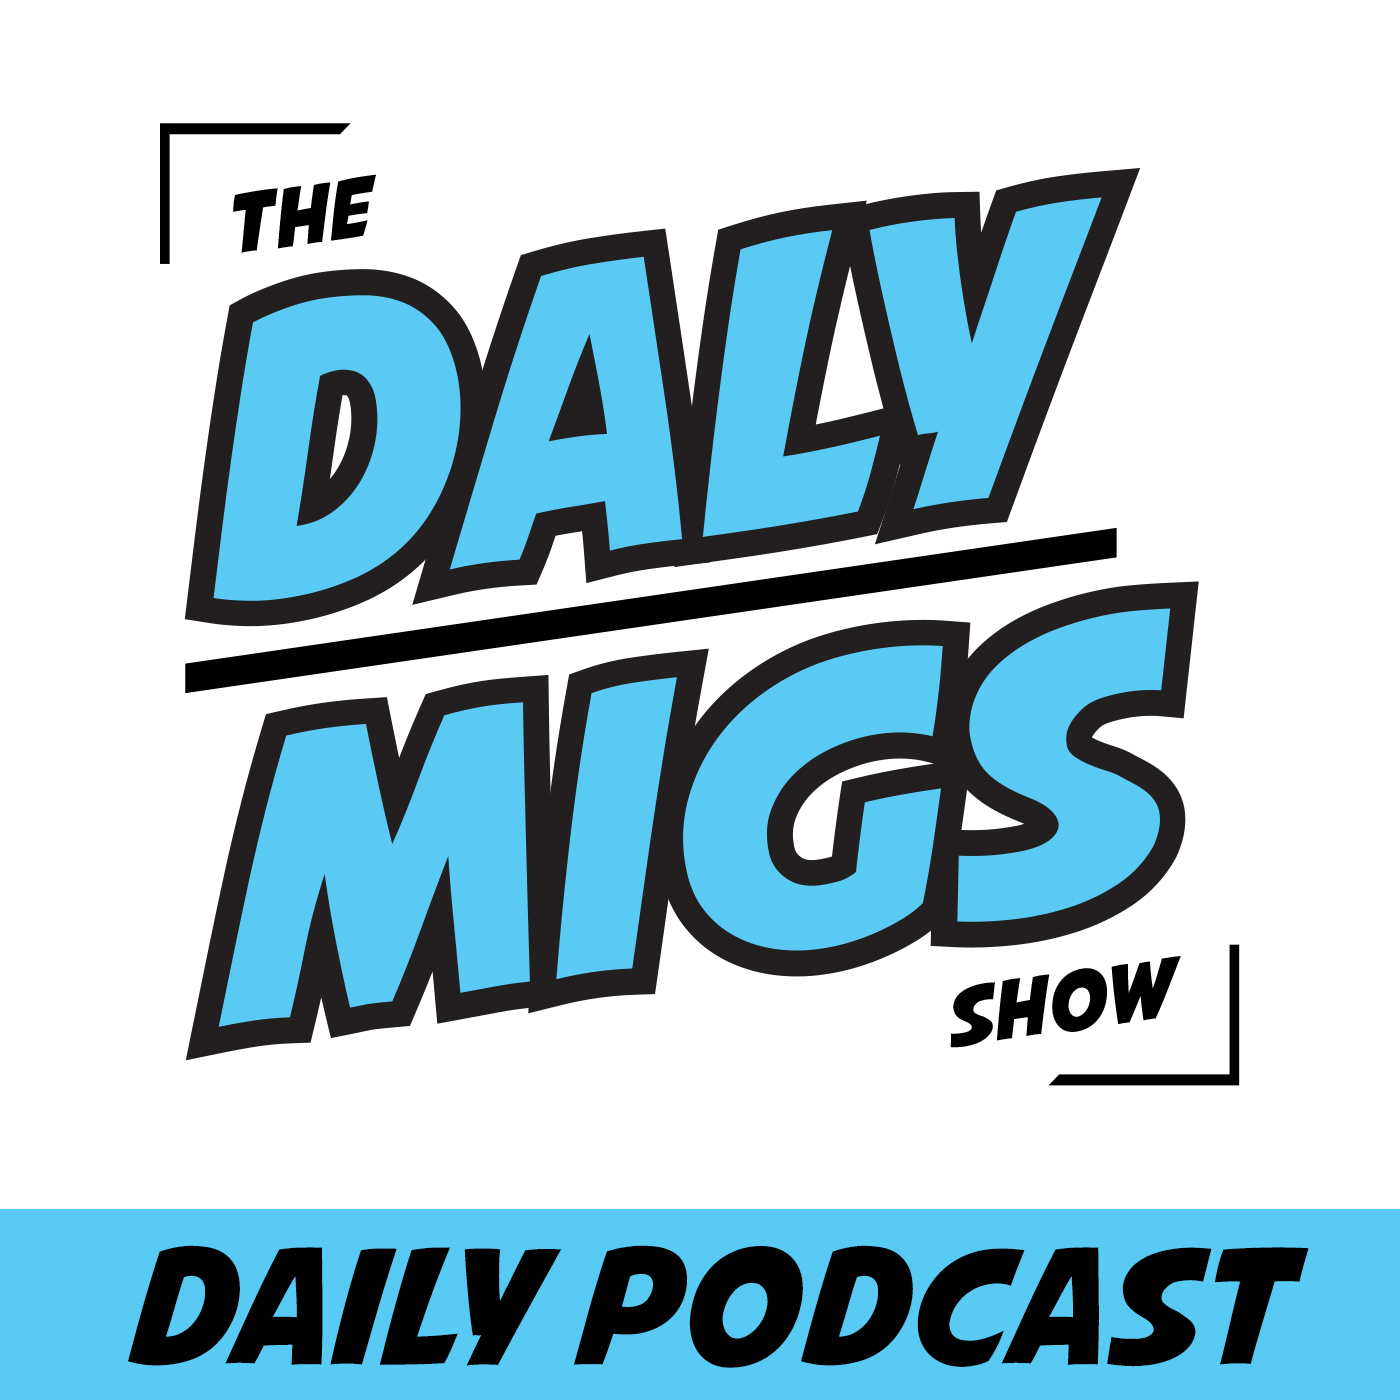 Daily Podcast pt. 2 - "Mother's Day: Migs' Mom"